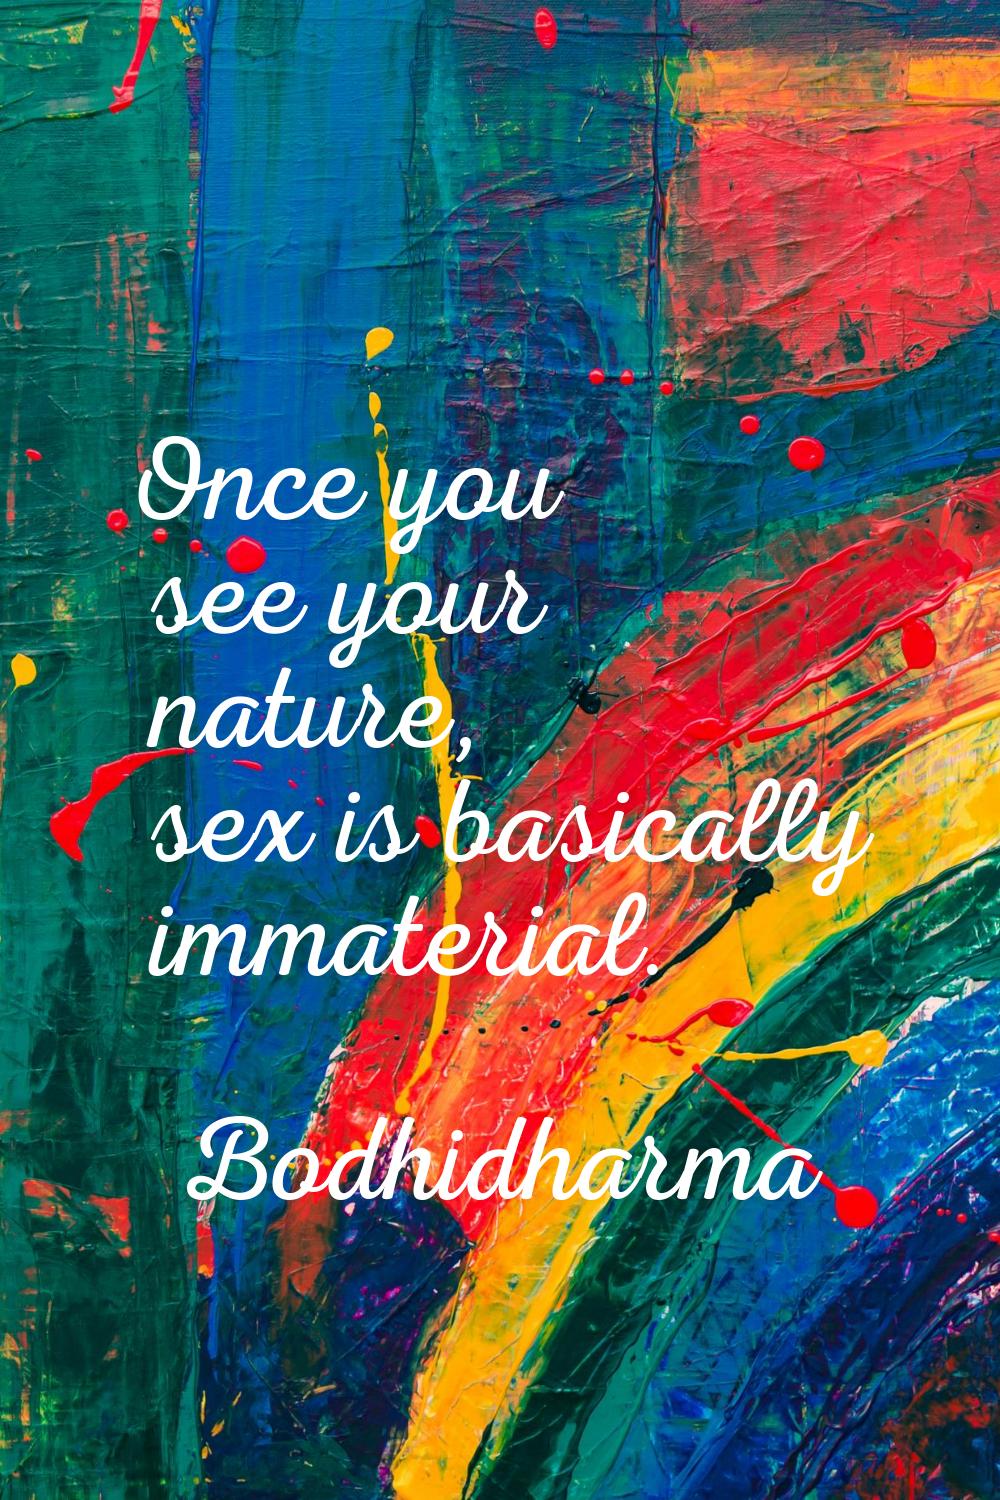 Once you see your nature, sex is basically immaterial.